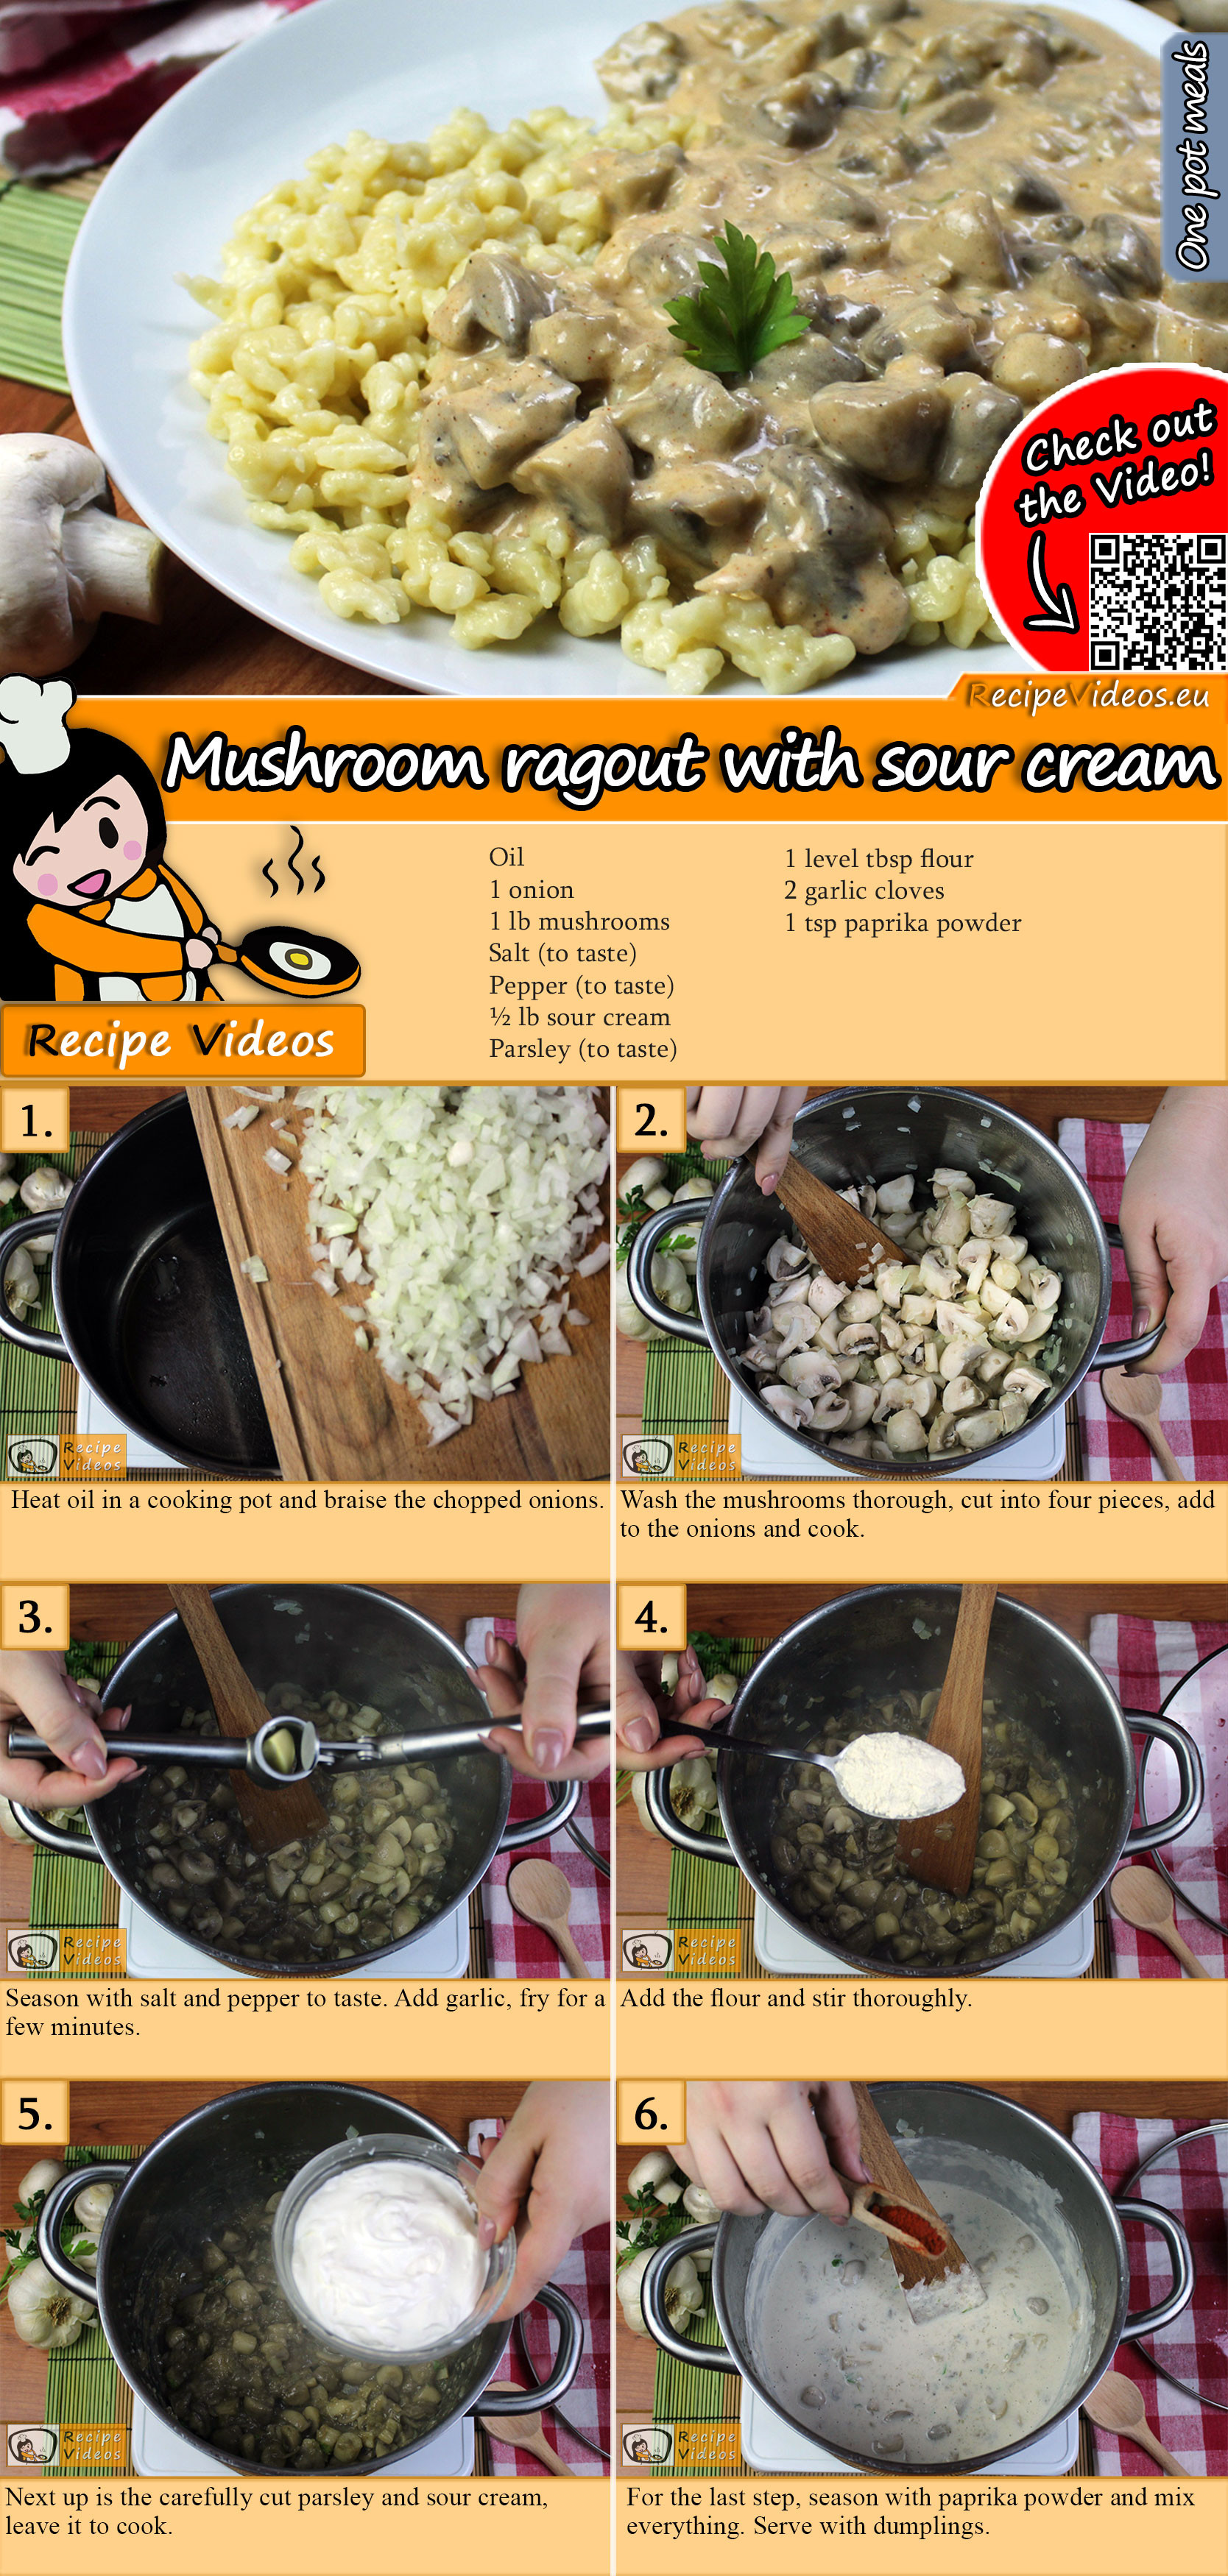 Mushroom ragout with sour cream recipe with video